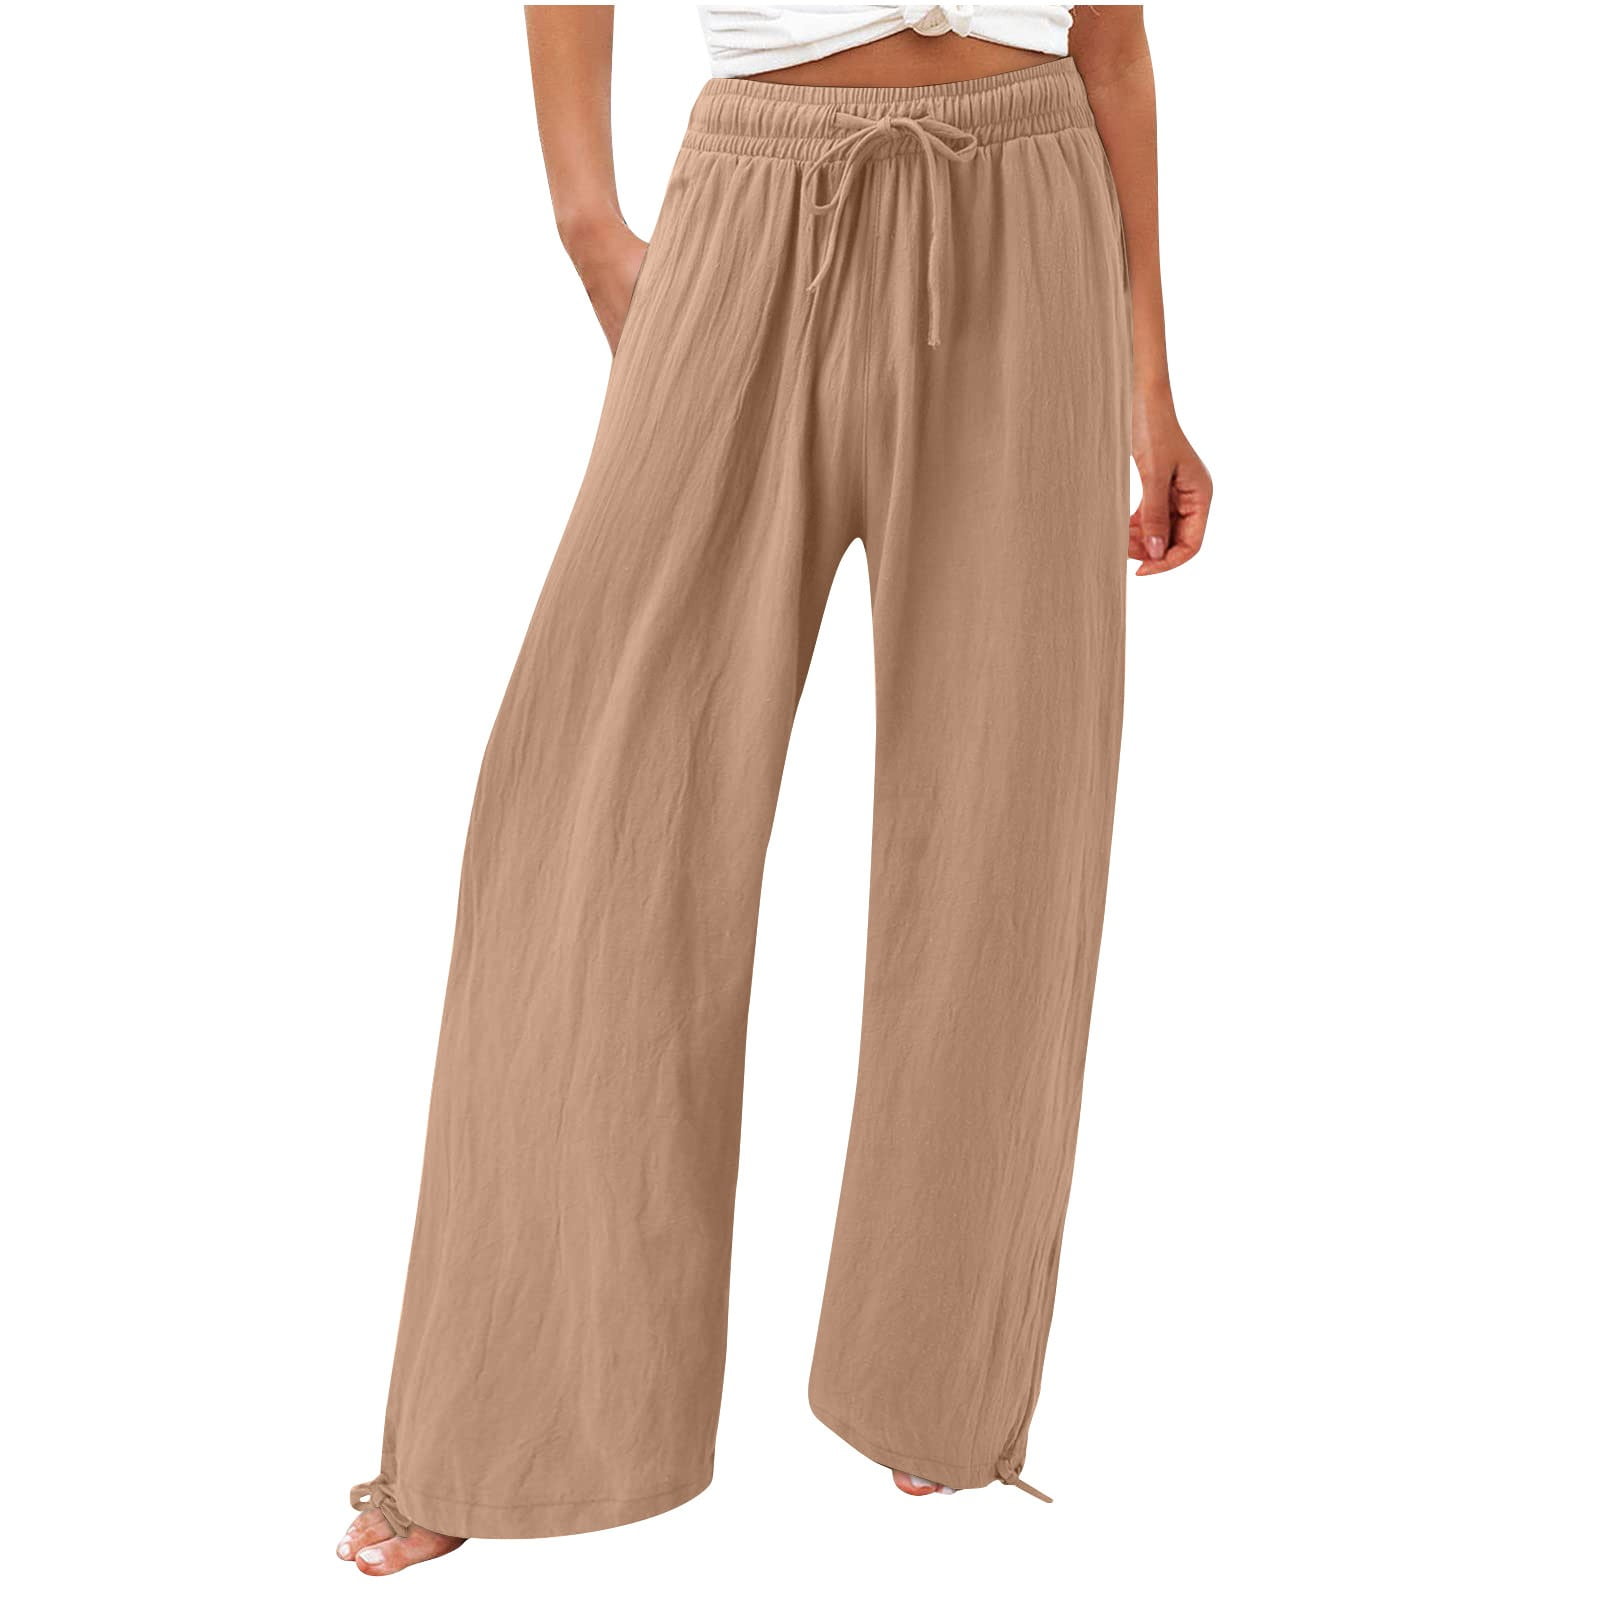 Mellow ivy cotton pants | Australian made clothing online, Womens Pant